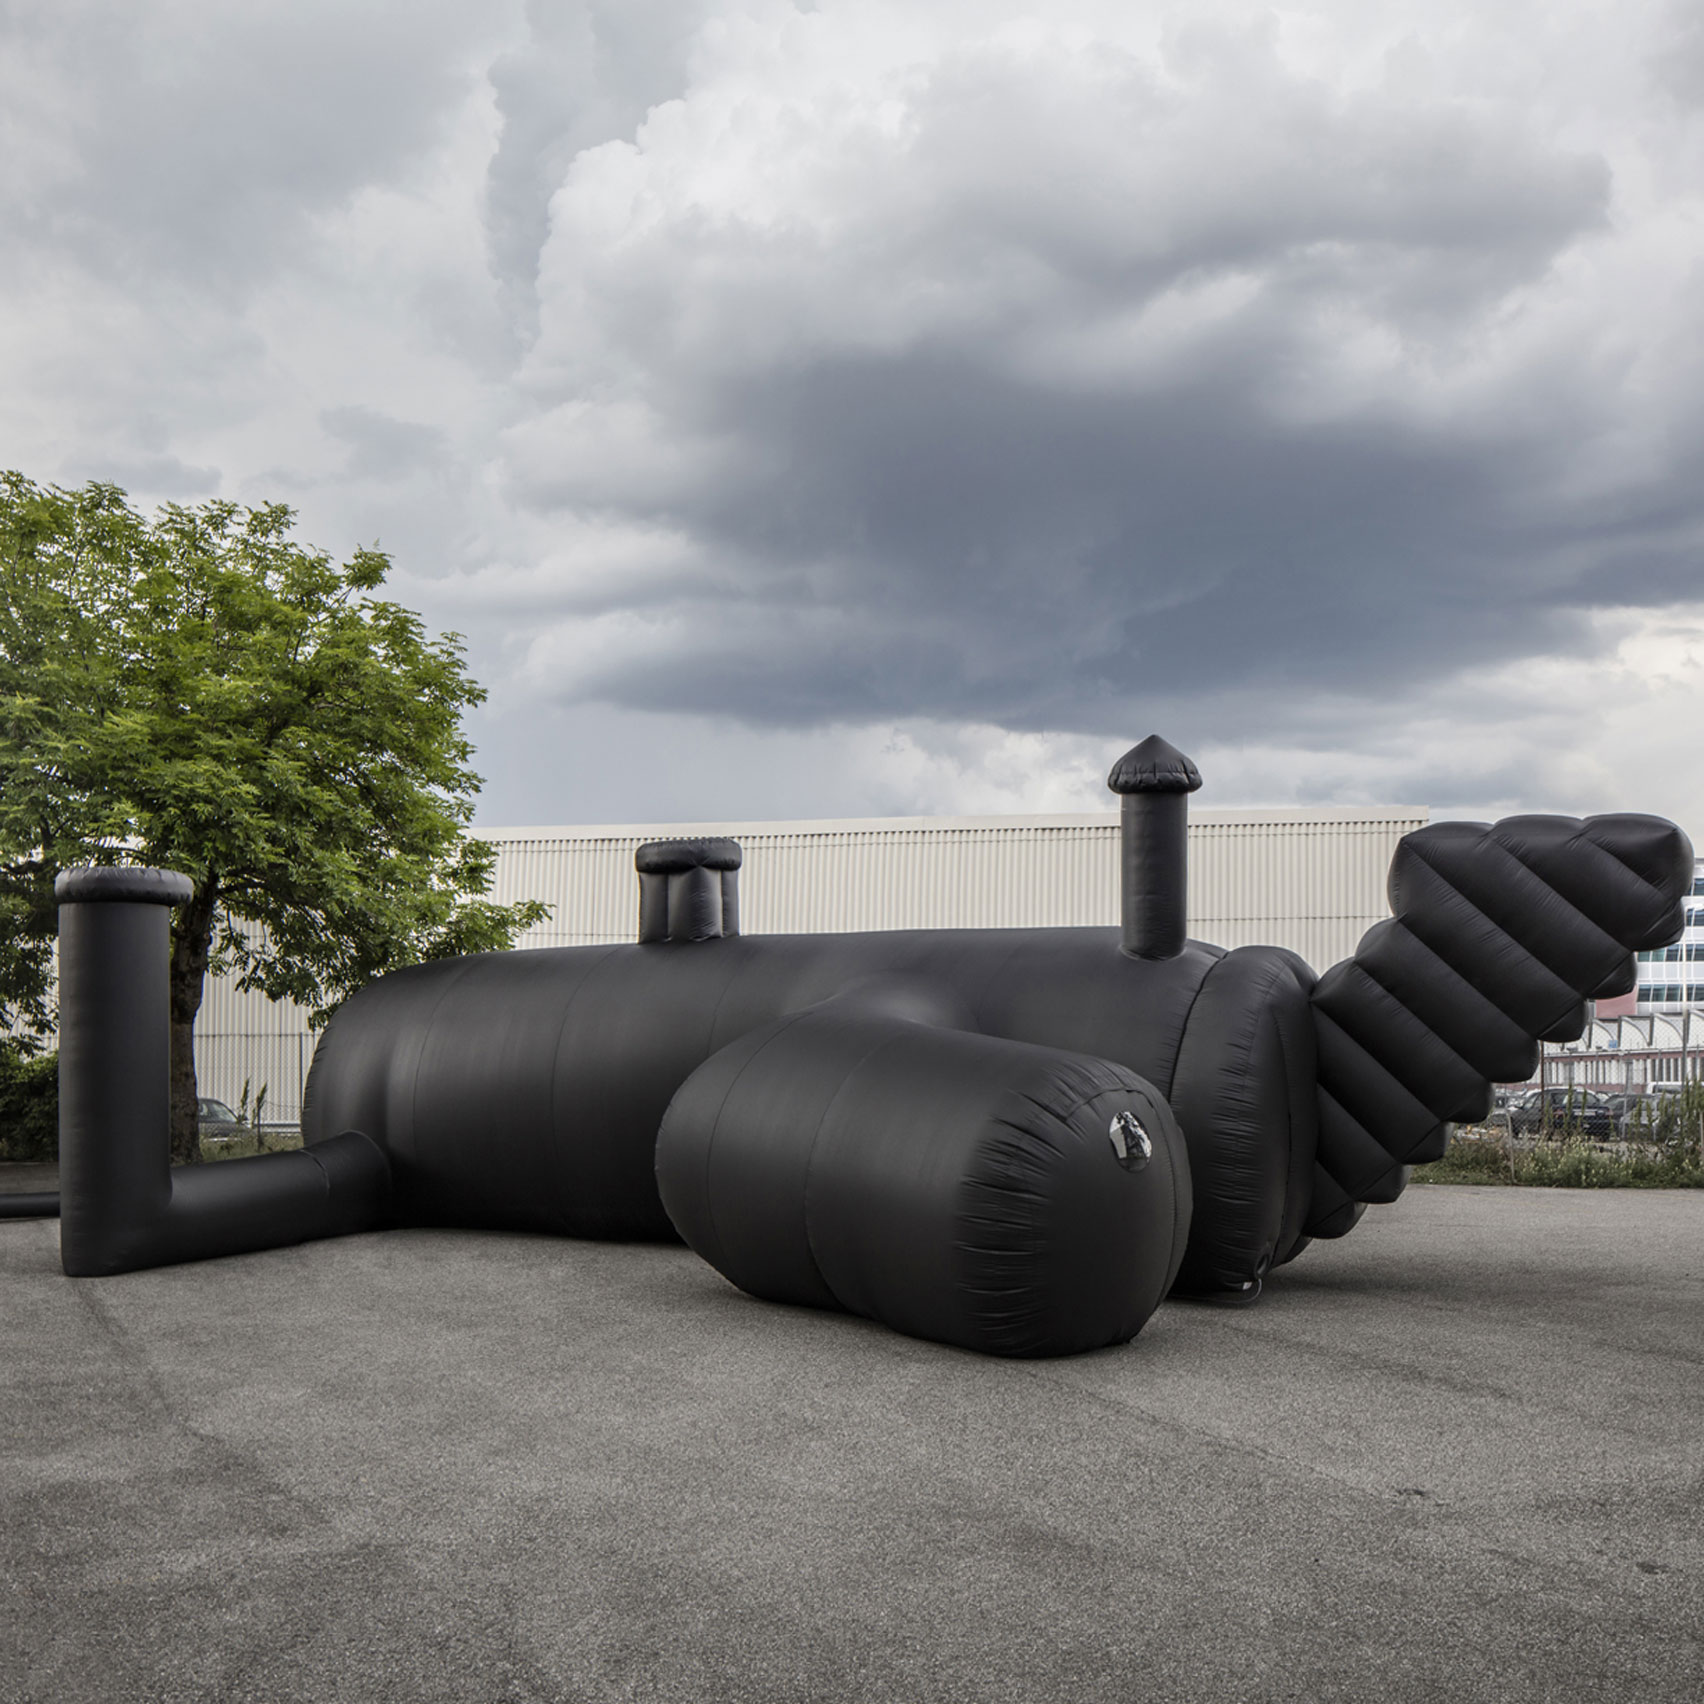 Inflatable nightclub created by Bureau A for Federation of Swiss Architects